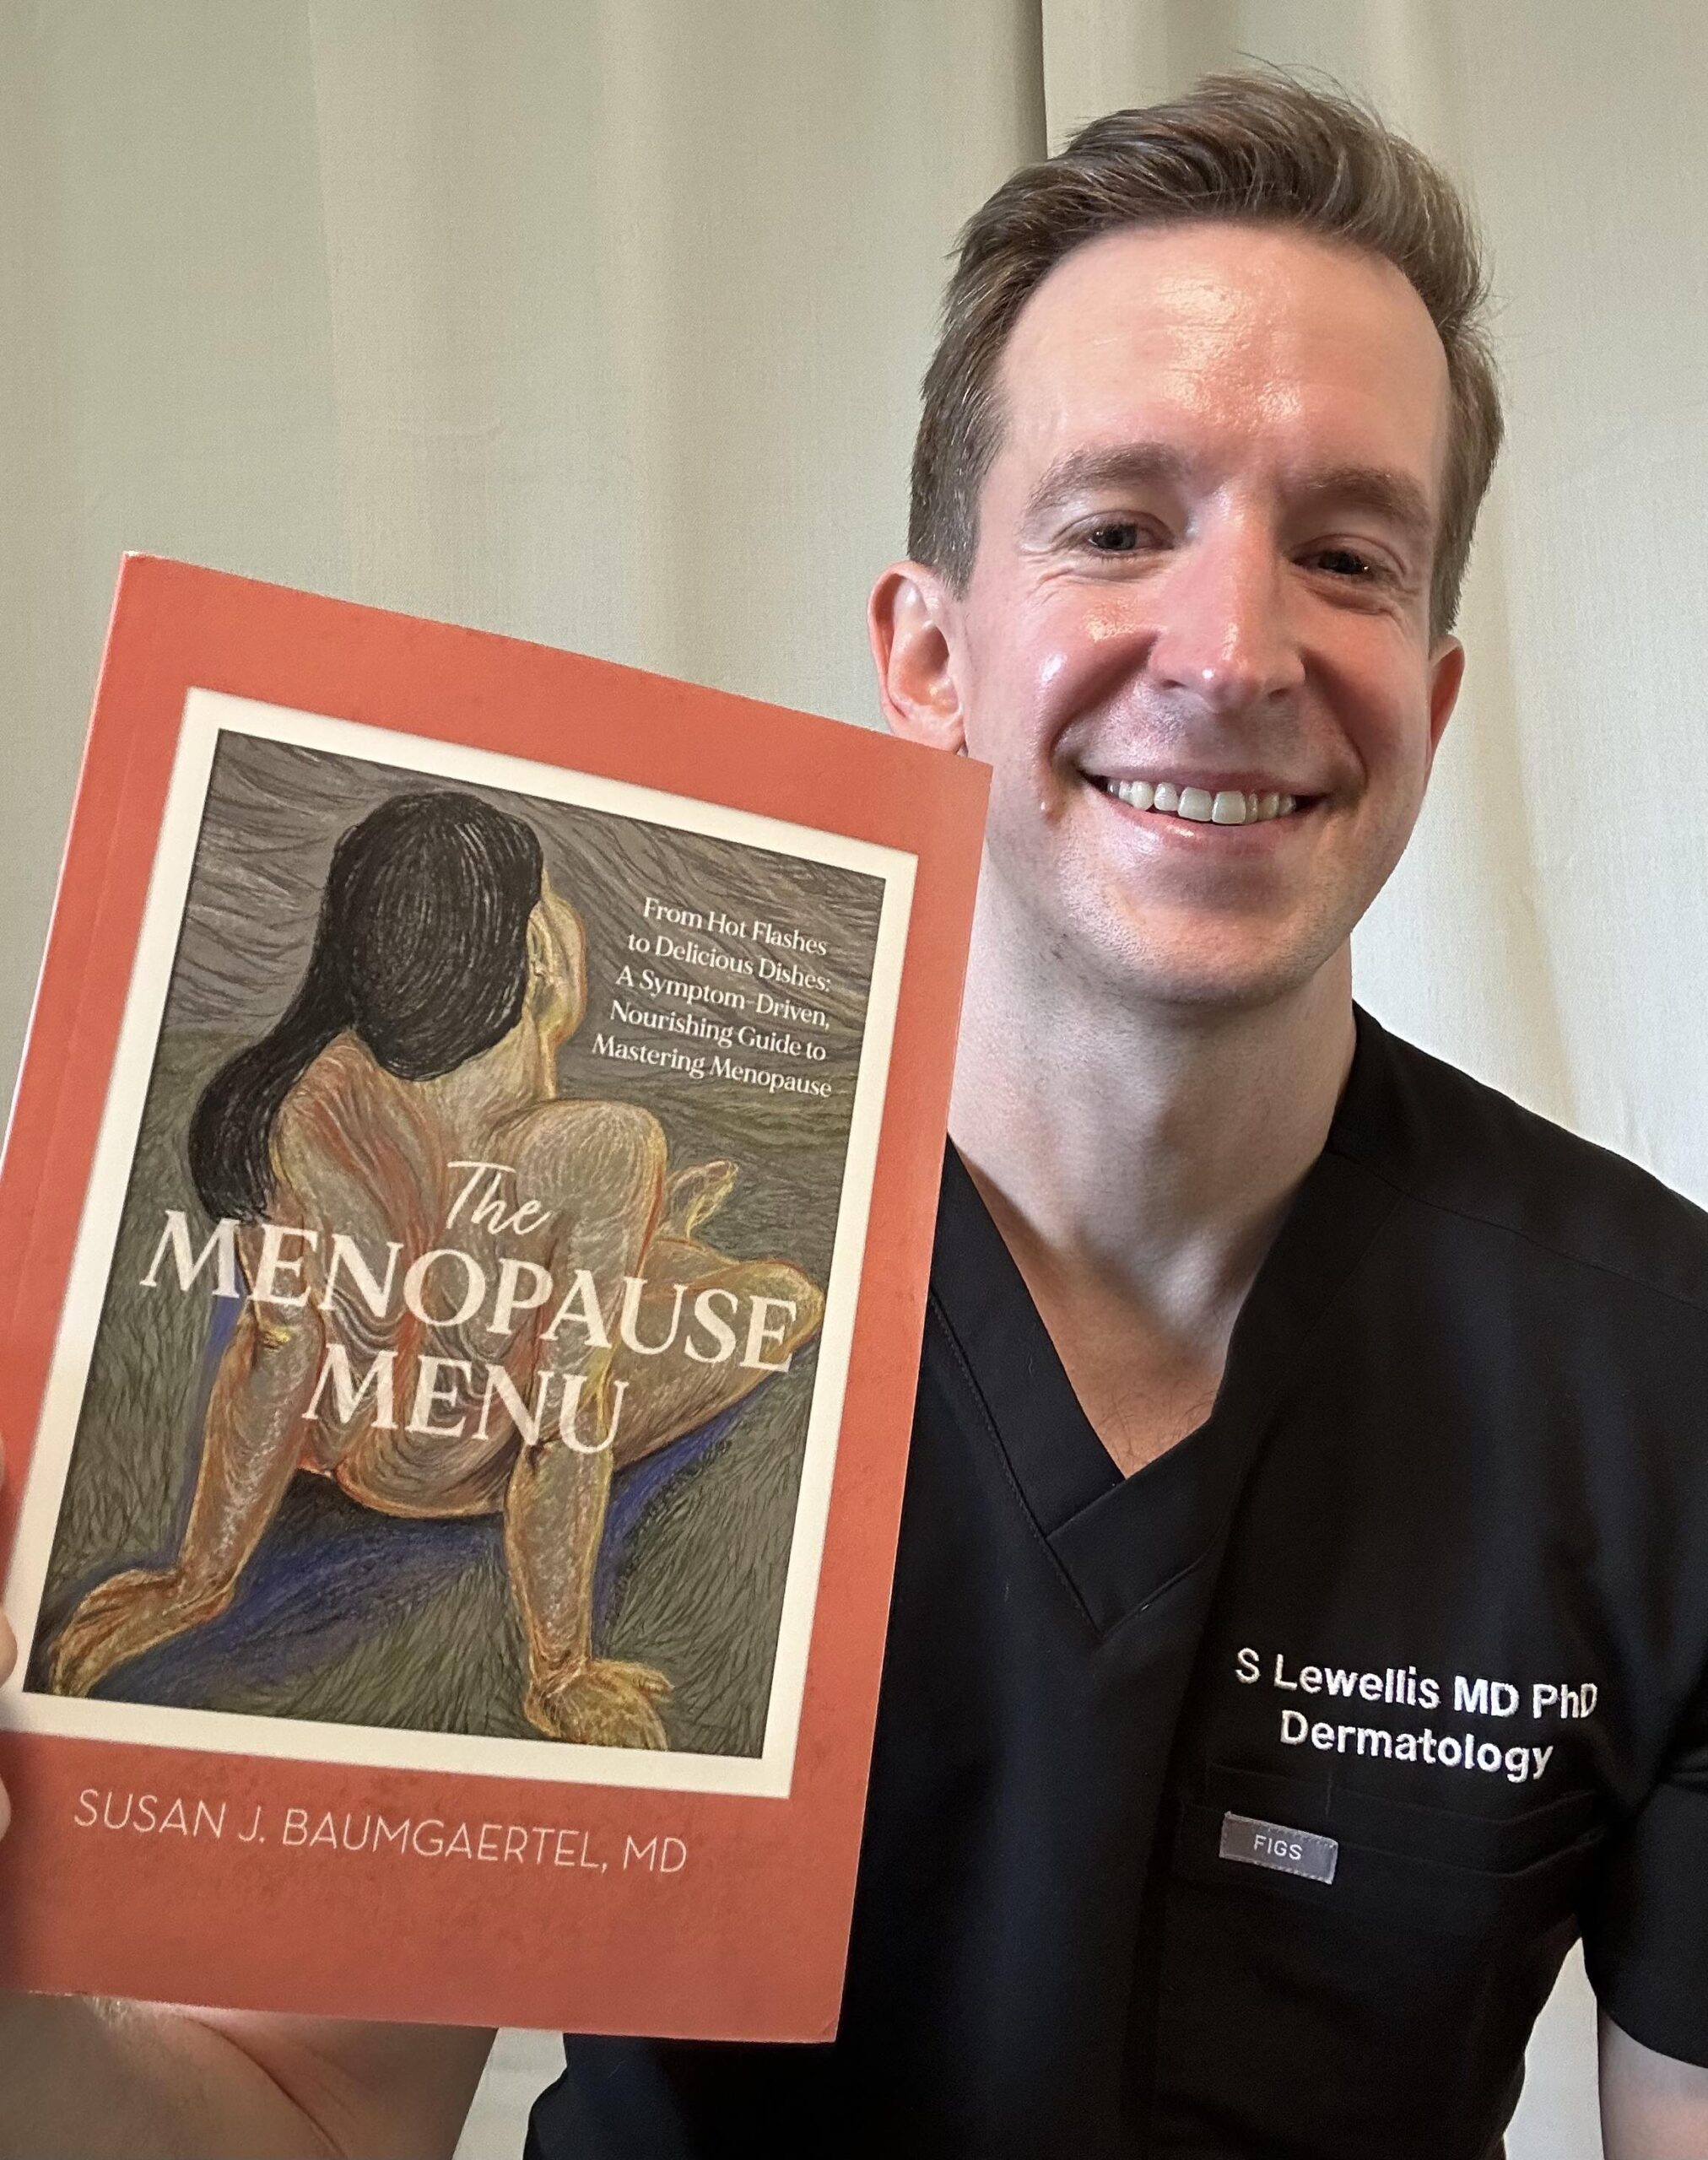 Celebrating A Physician Author: Dr. Baumgaertel and The Menopause Menu